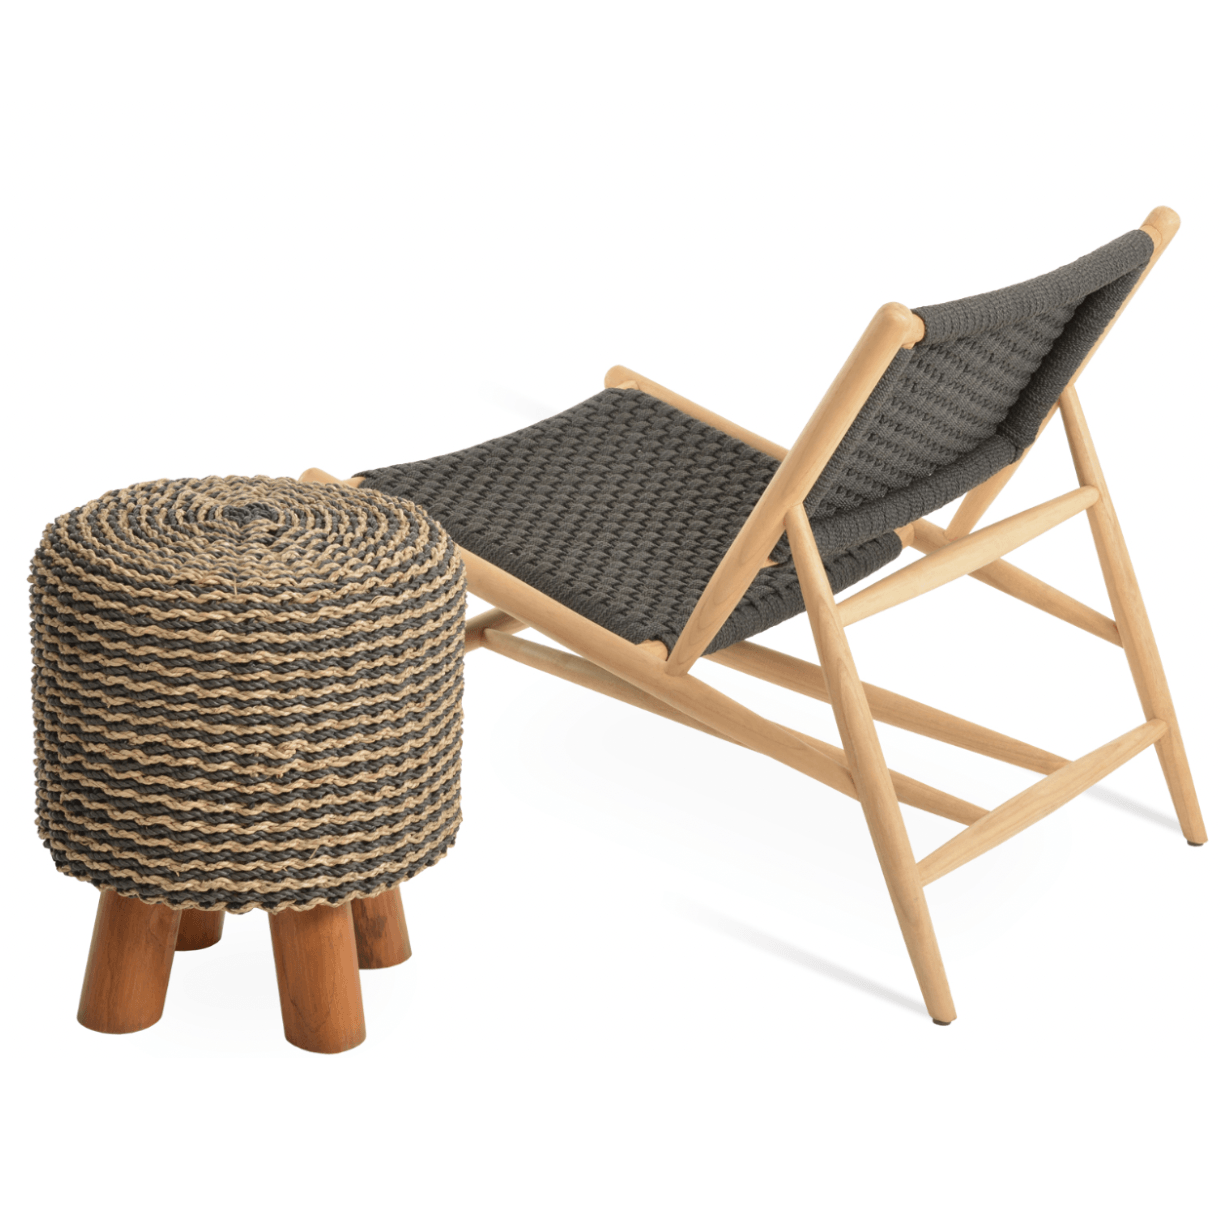 Rattan Lounge Chair Phuket Patio Chairs Lounge - Your Bar Stools Canada